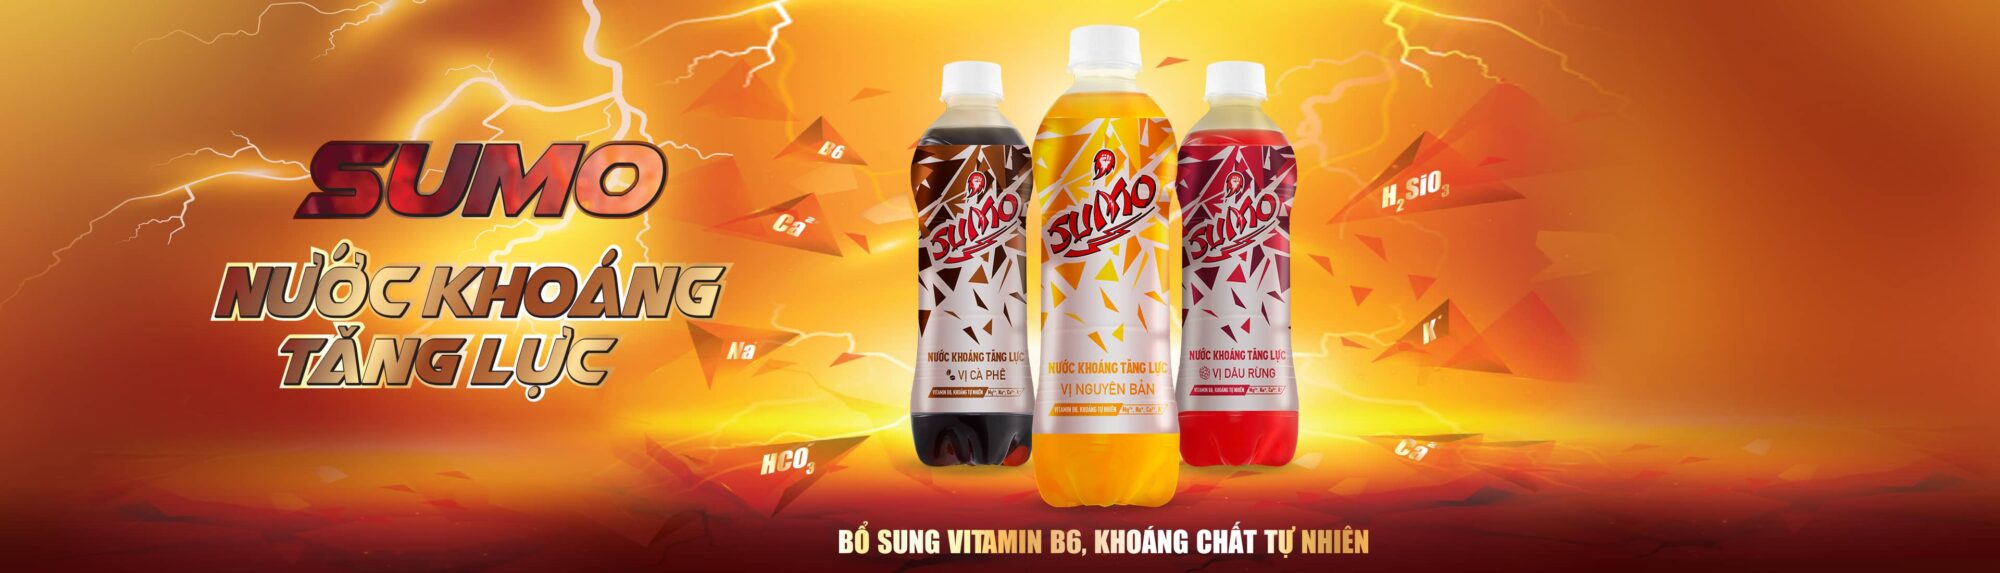 Sumo energy mineral water